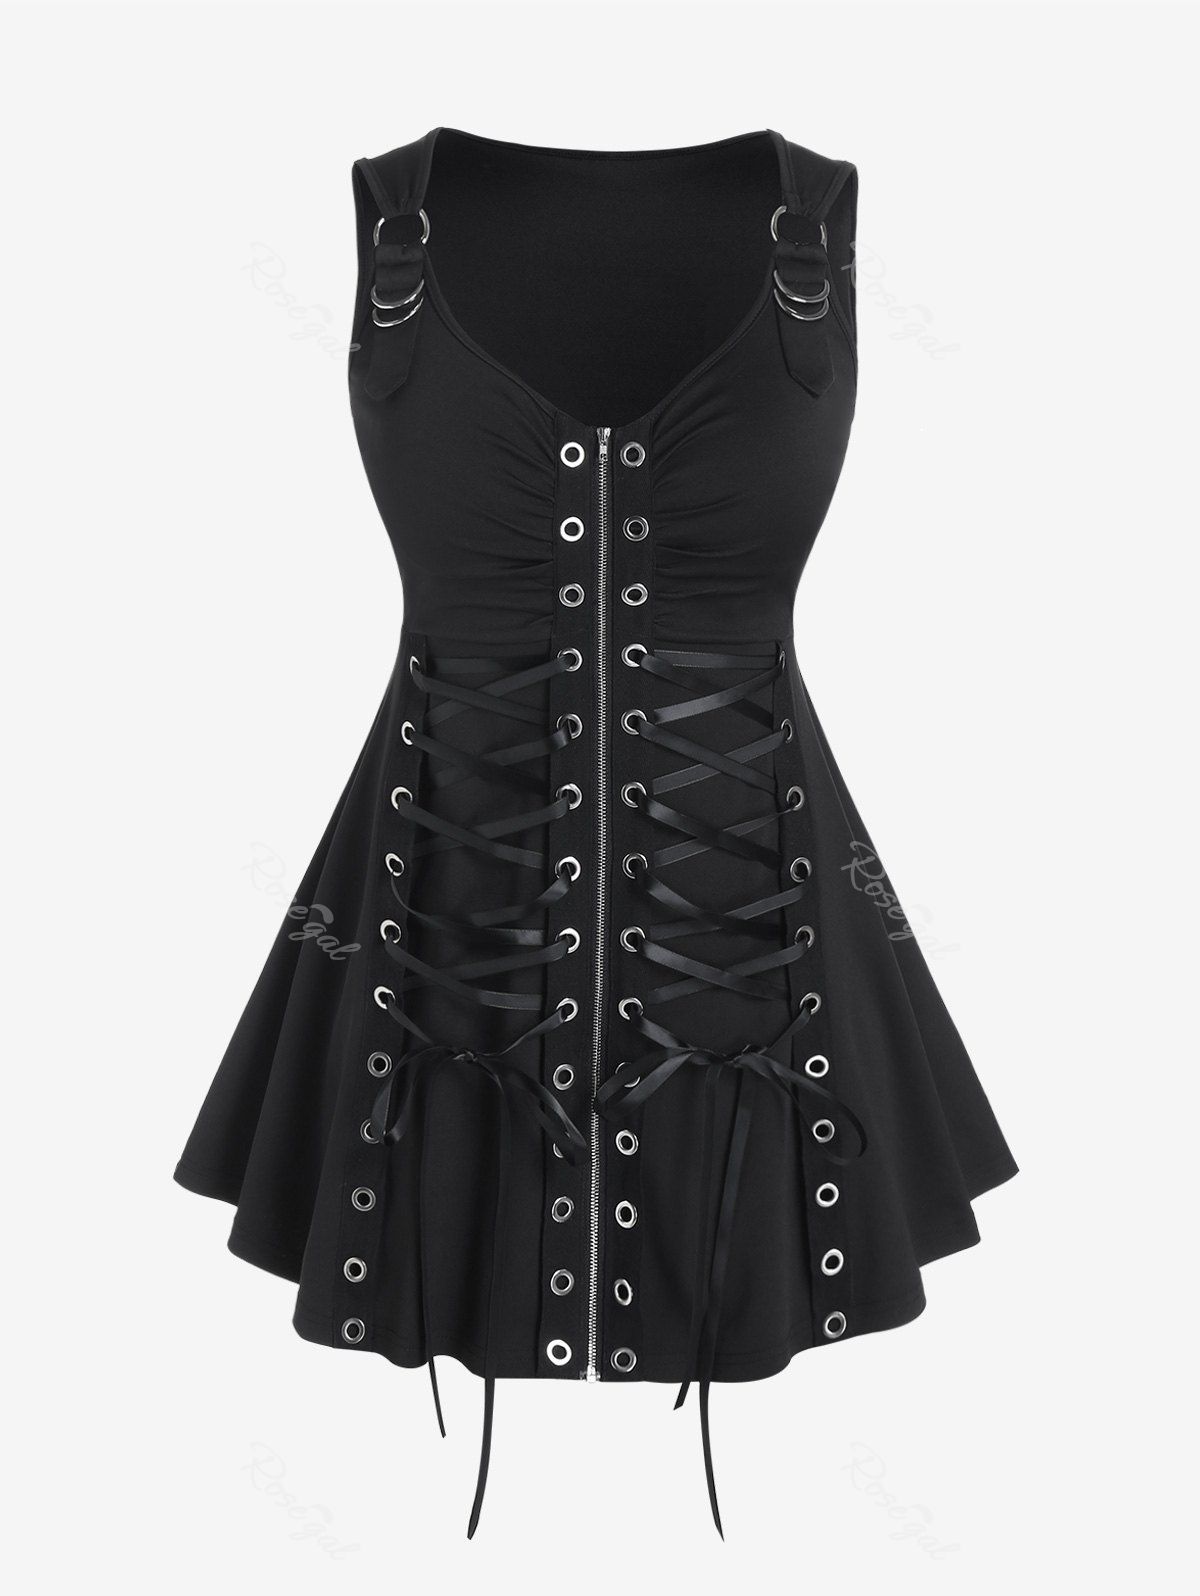 Hot Lace Up Grommets Full Zipper Gothic Tank Top  